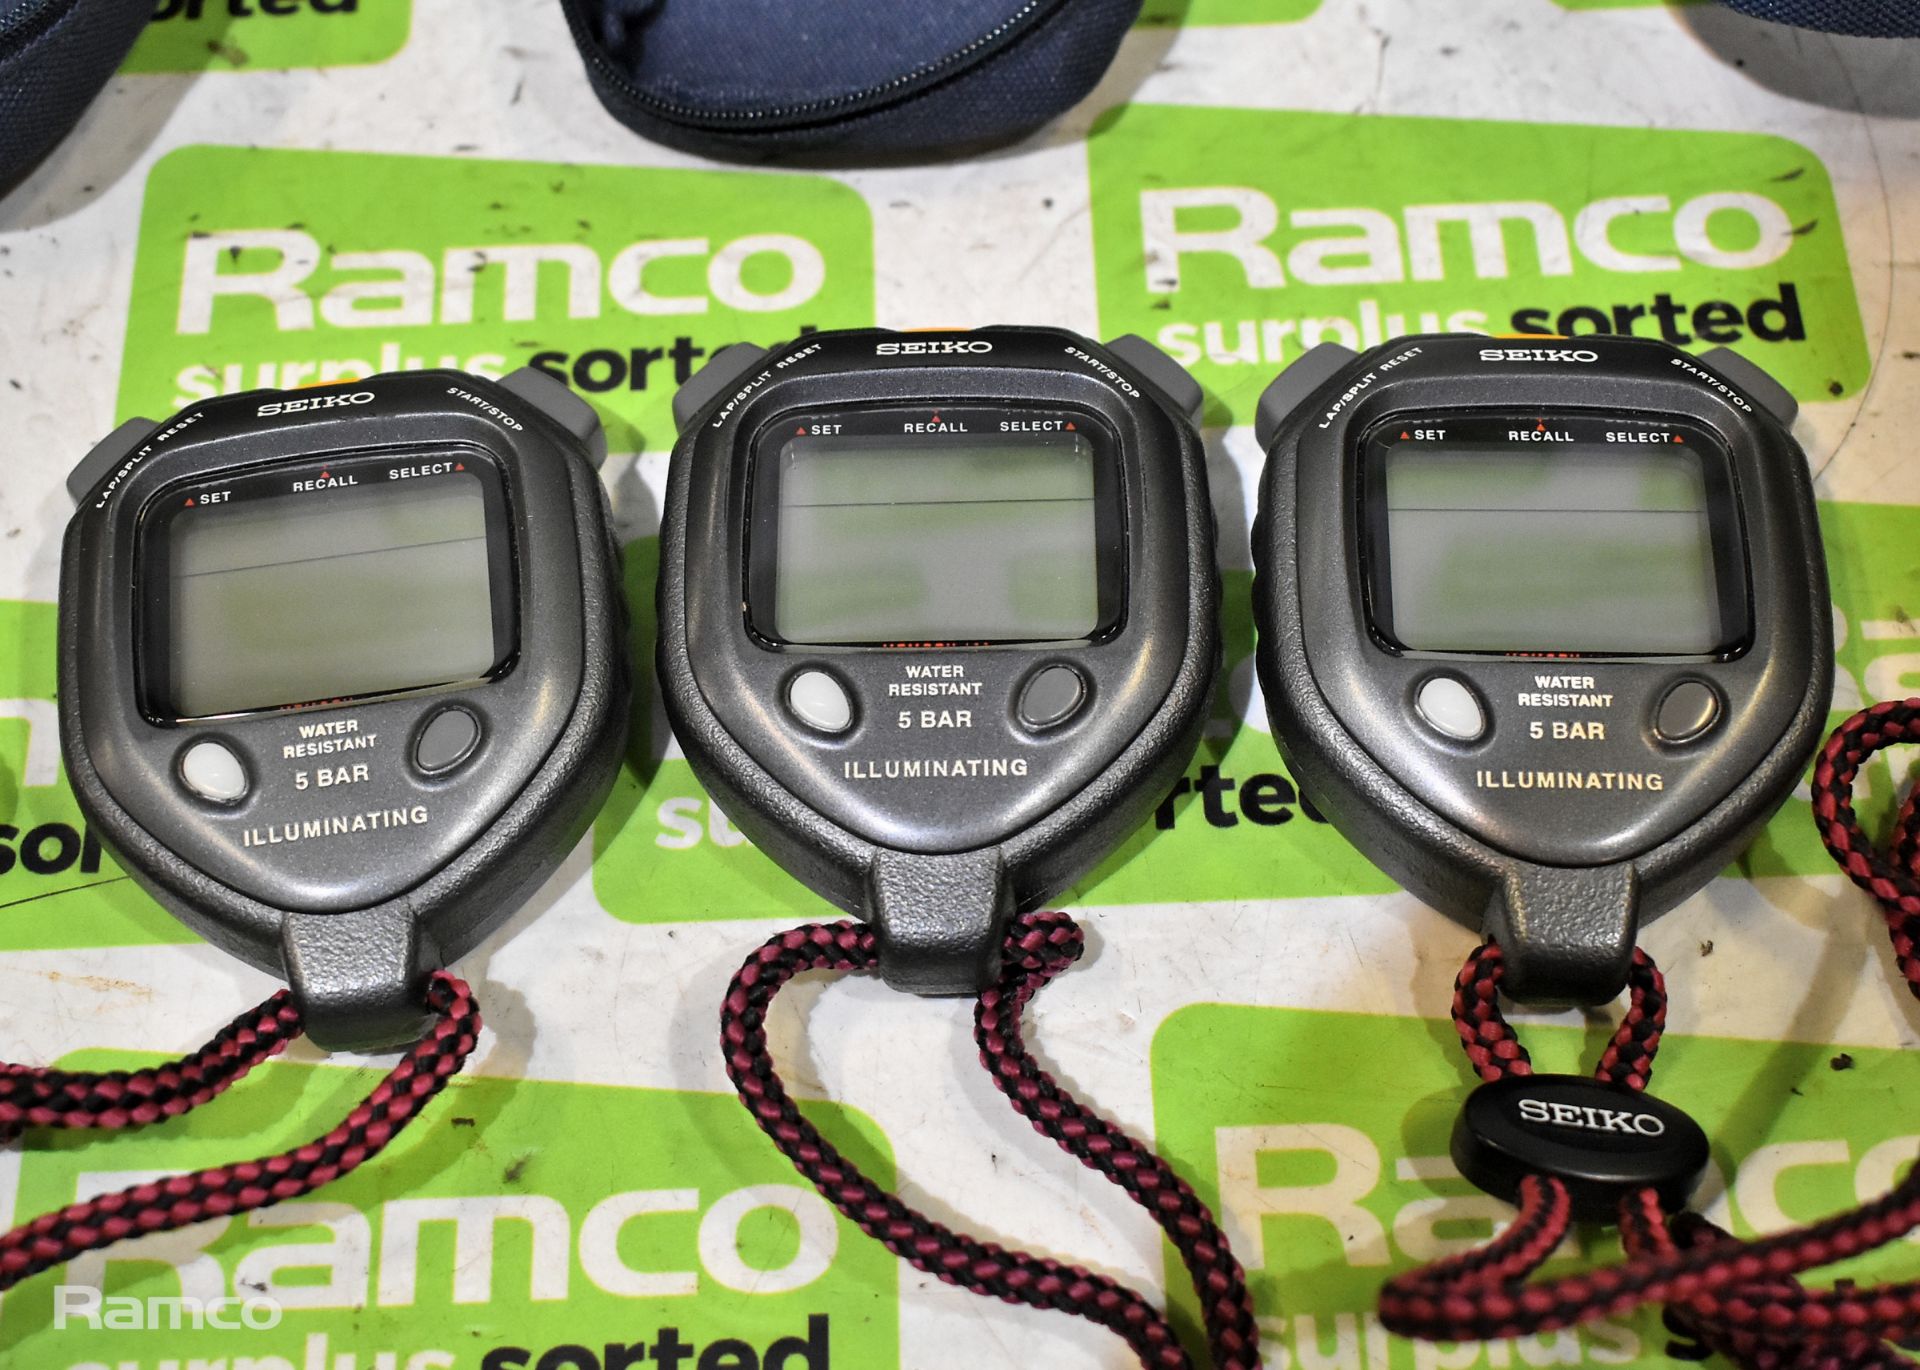 3x Seiko 5 bar digital stopwatches with case - Image 2 of 3